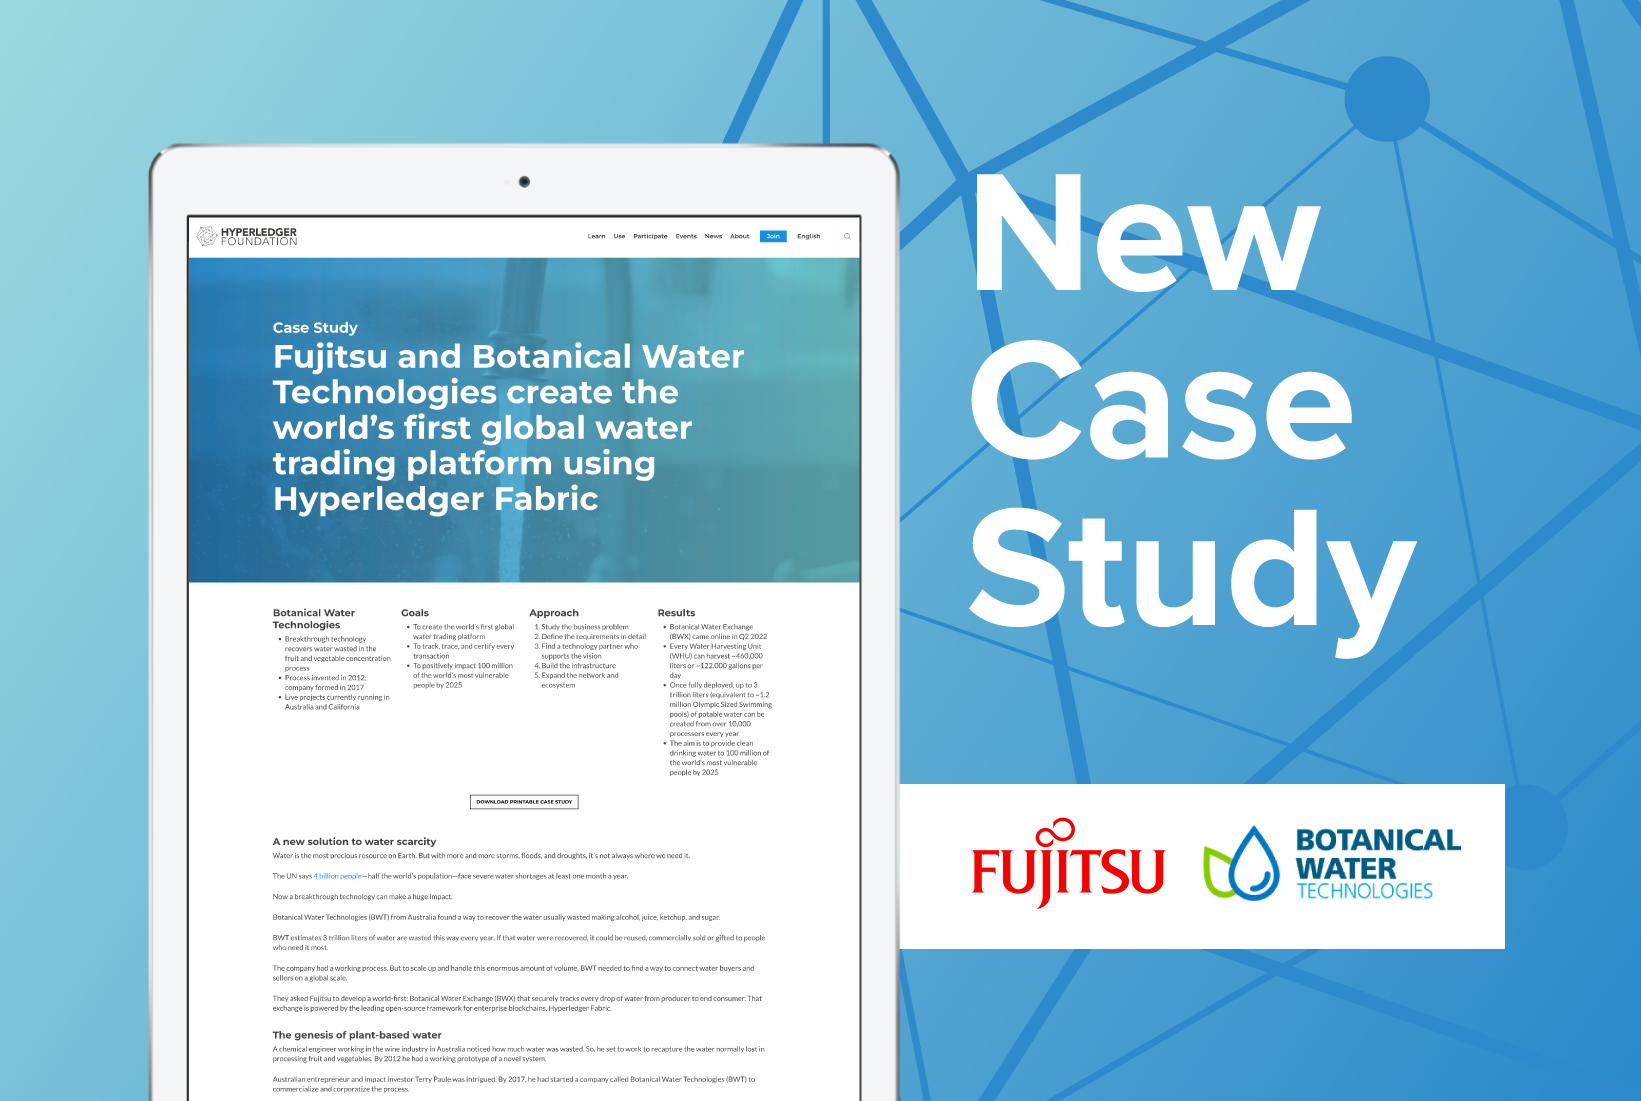 Fujitsu Develops Hyperledger Fabric-Powered Exchange for Plant-Sourced Water Recovered by Botanical Water Technologies